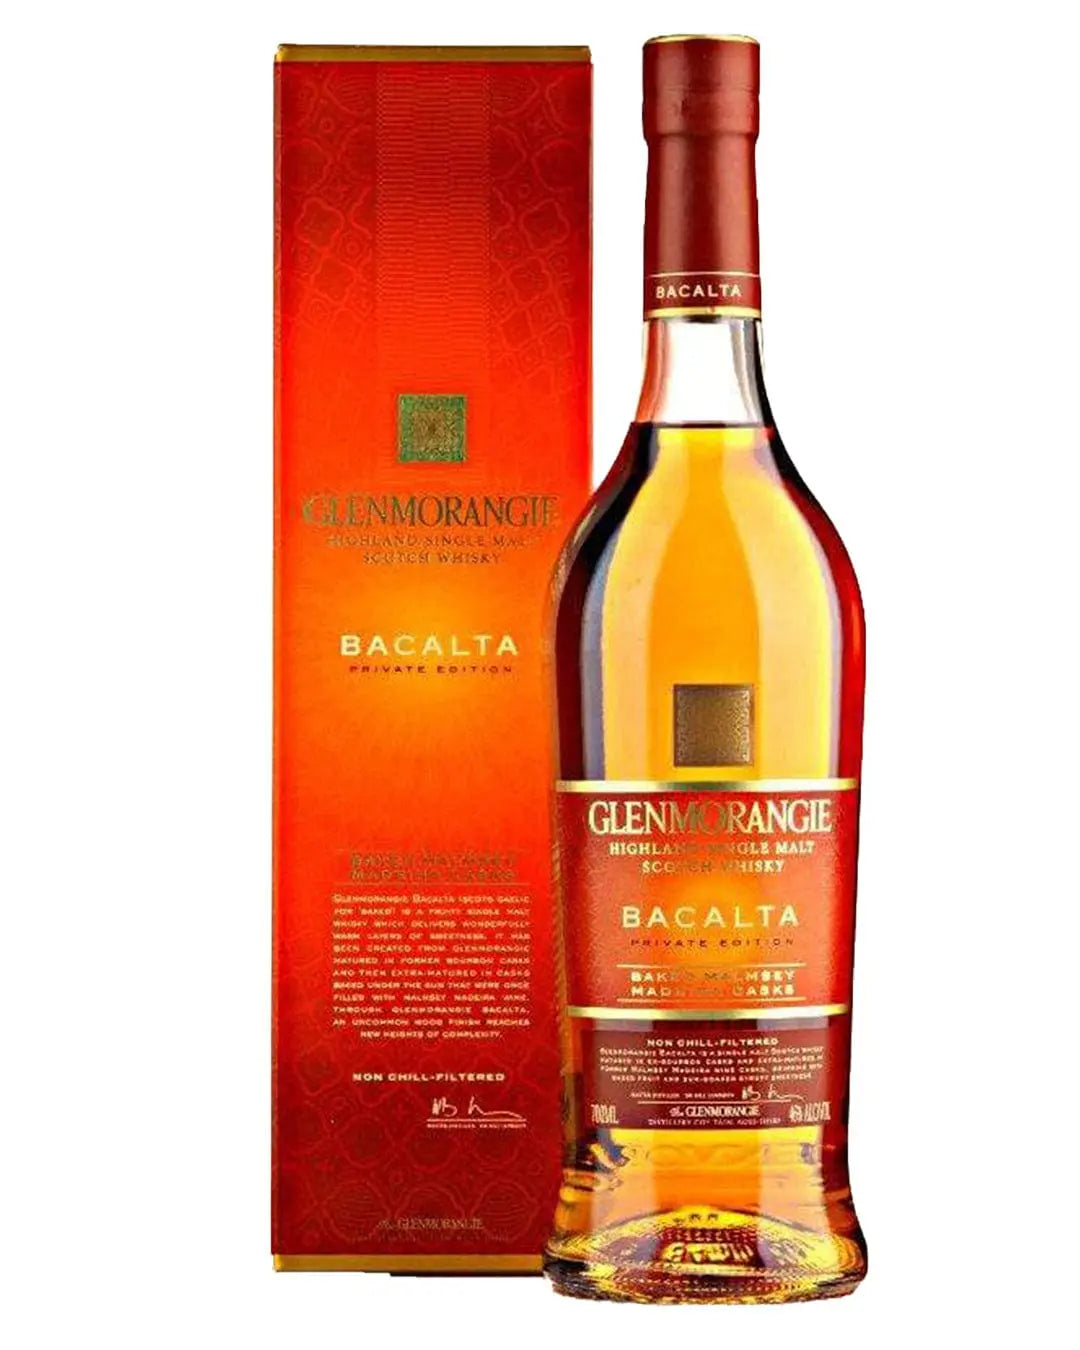 Glenmorangie Bacalta Private Edition Whisky, 70 cl Whisky